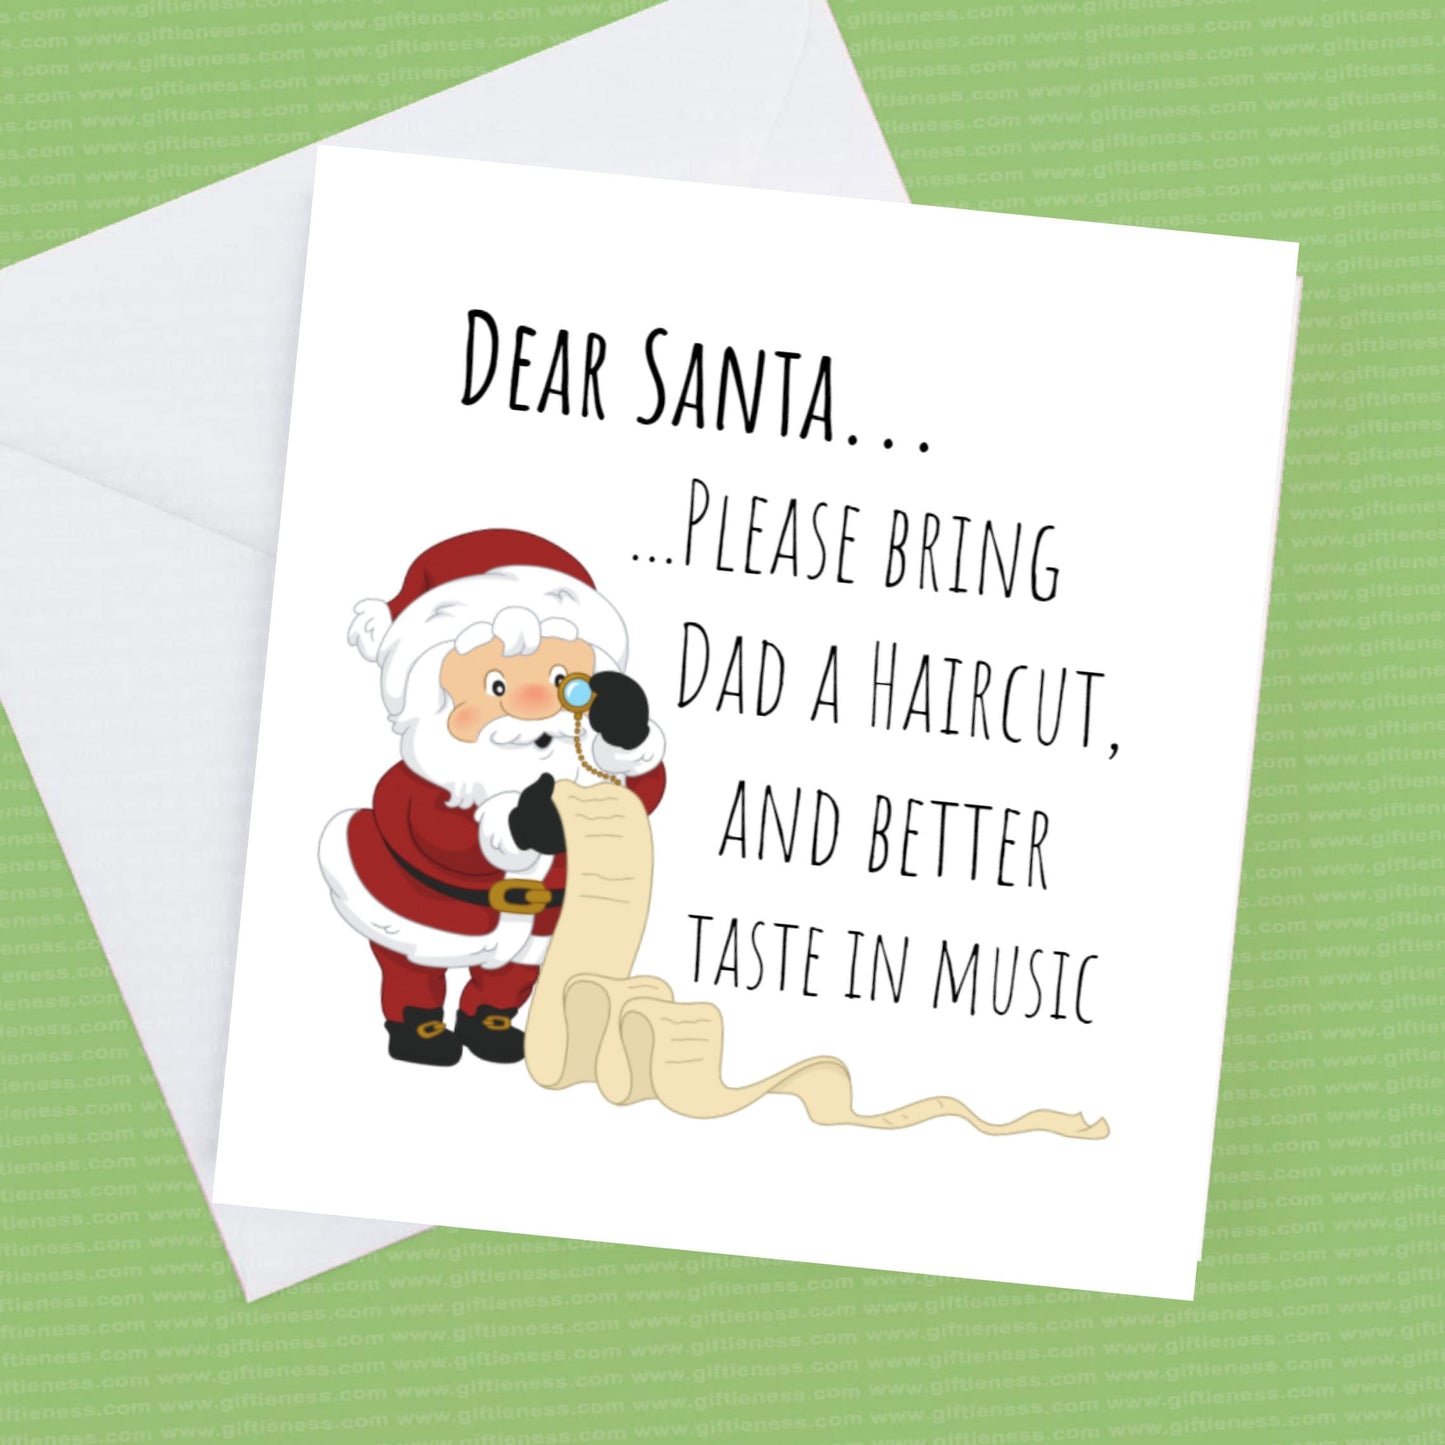 Dear Santa please bring Dad a haircut and better taste in music, can be personalised